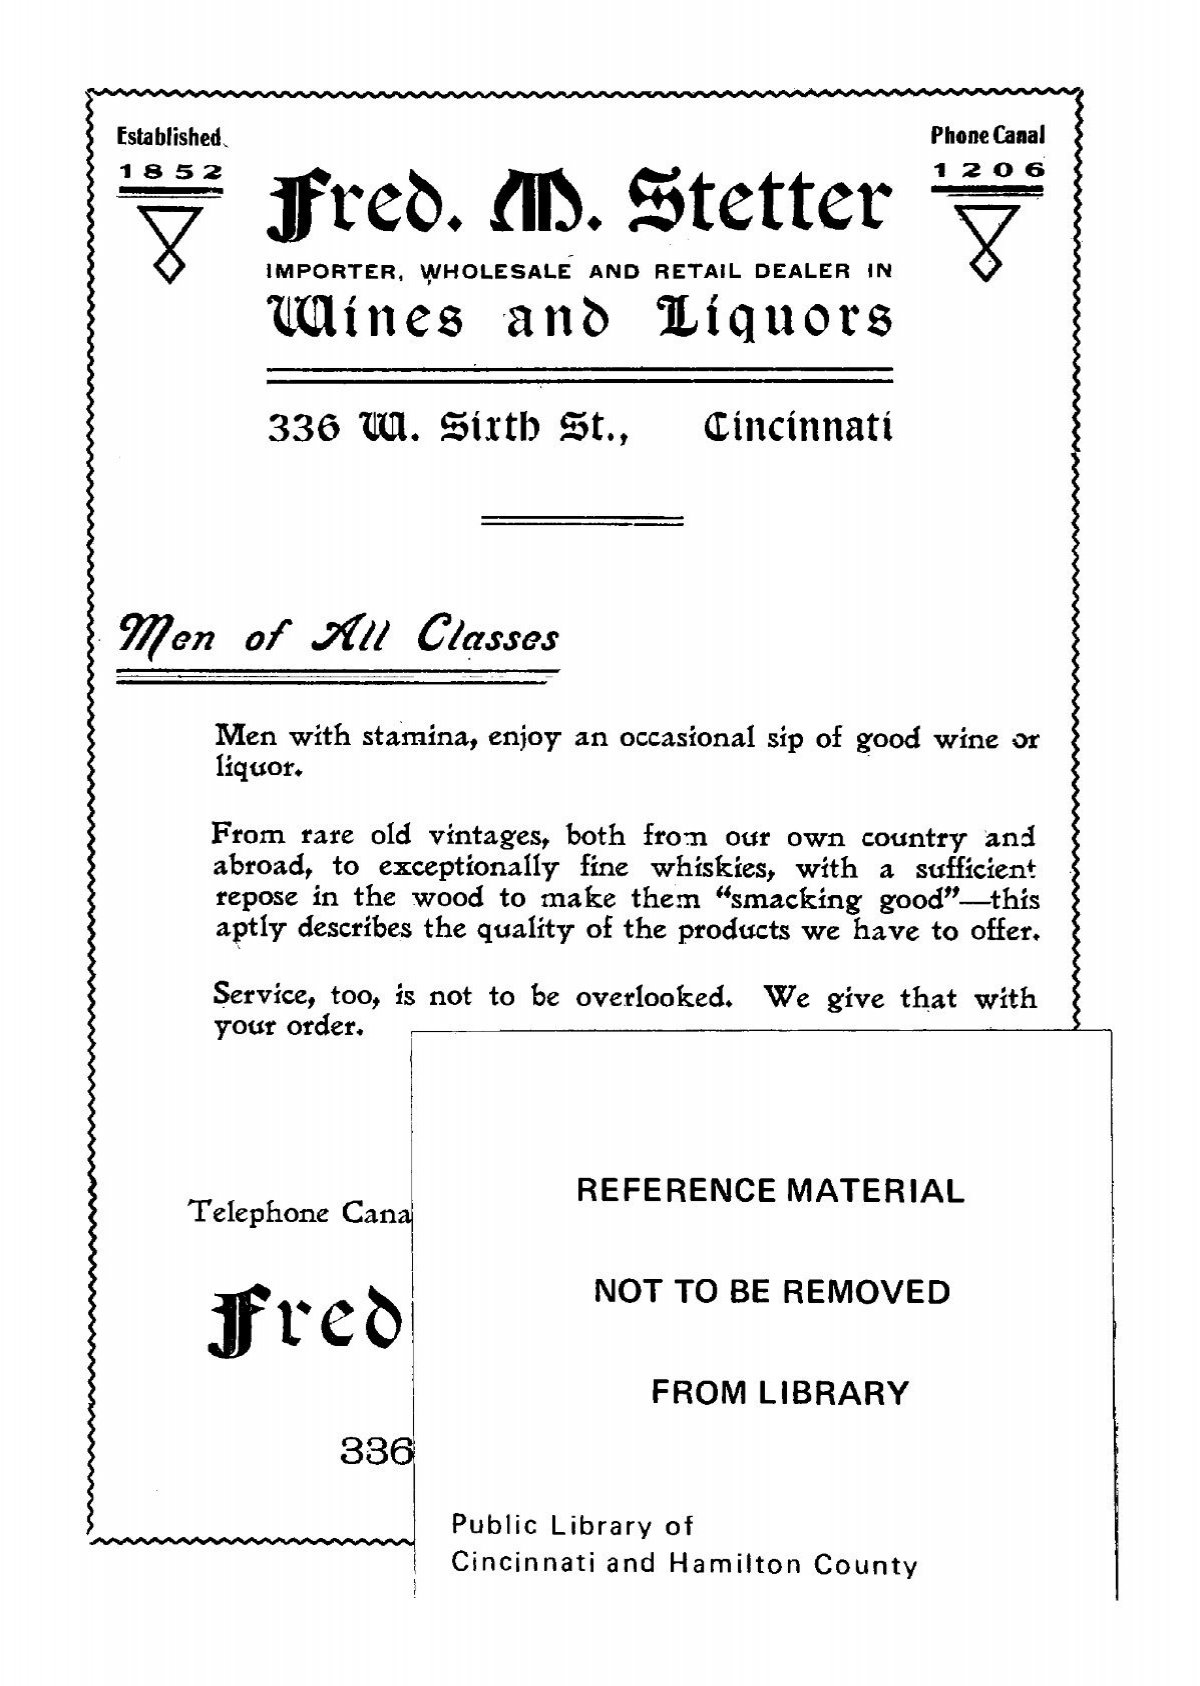 Jfreb. M. Stetter - Virtual Library of the Public Library of Cincinnati